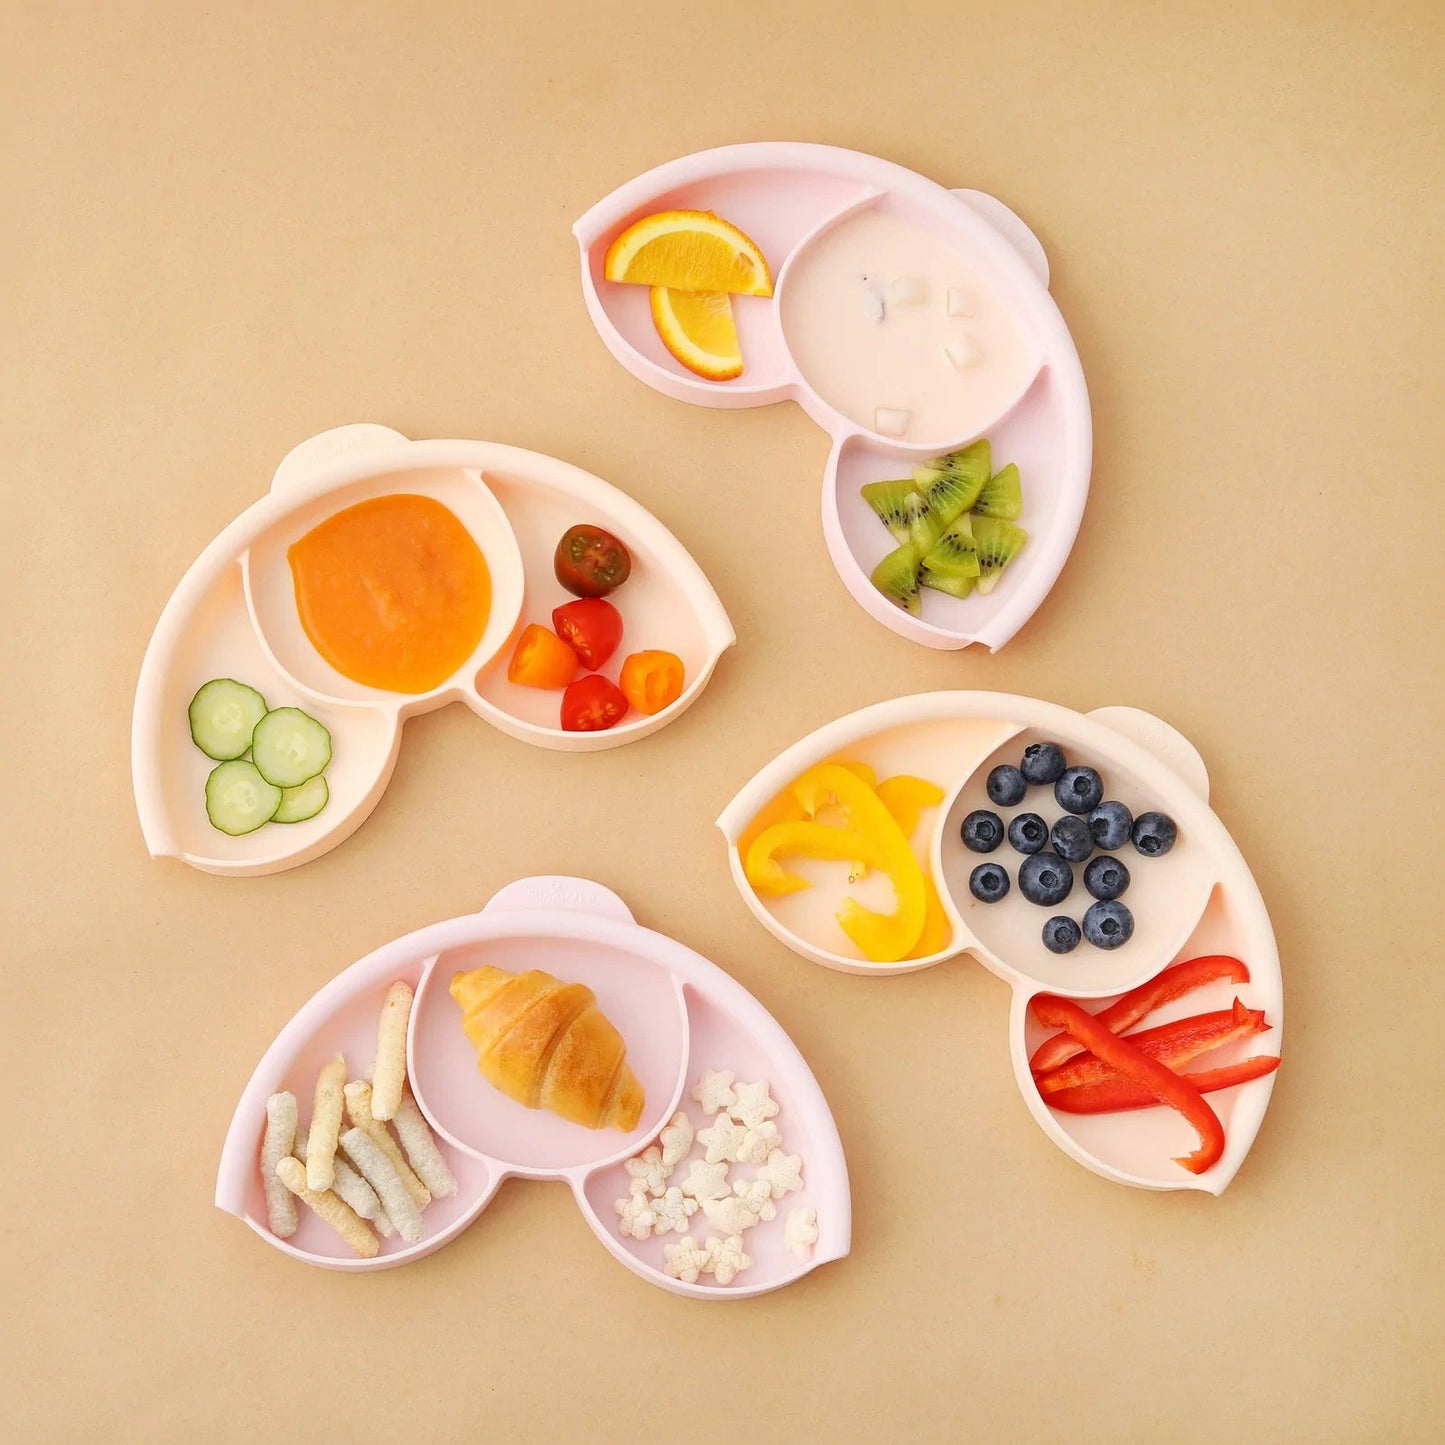 Healthy Meal Set